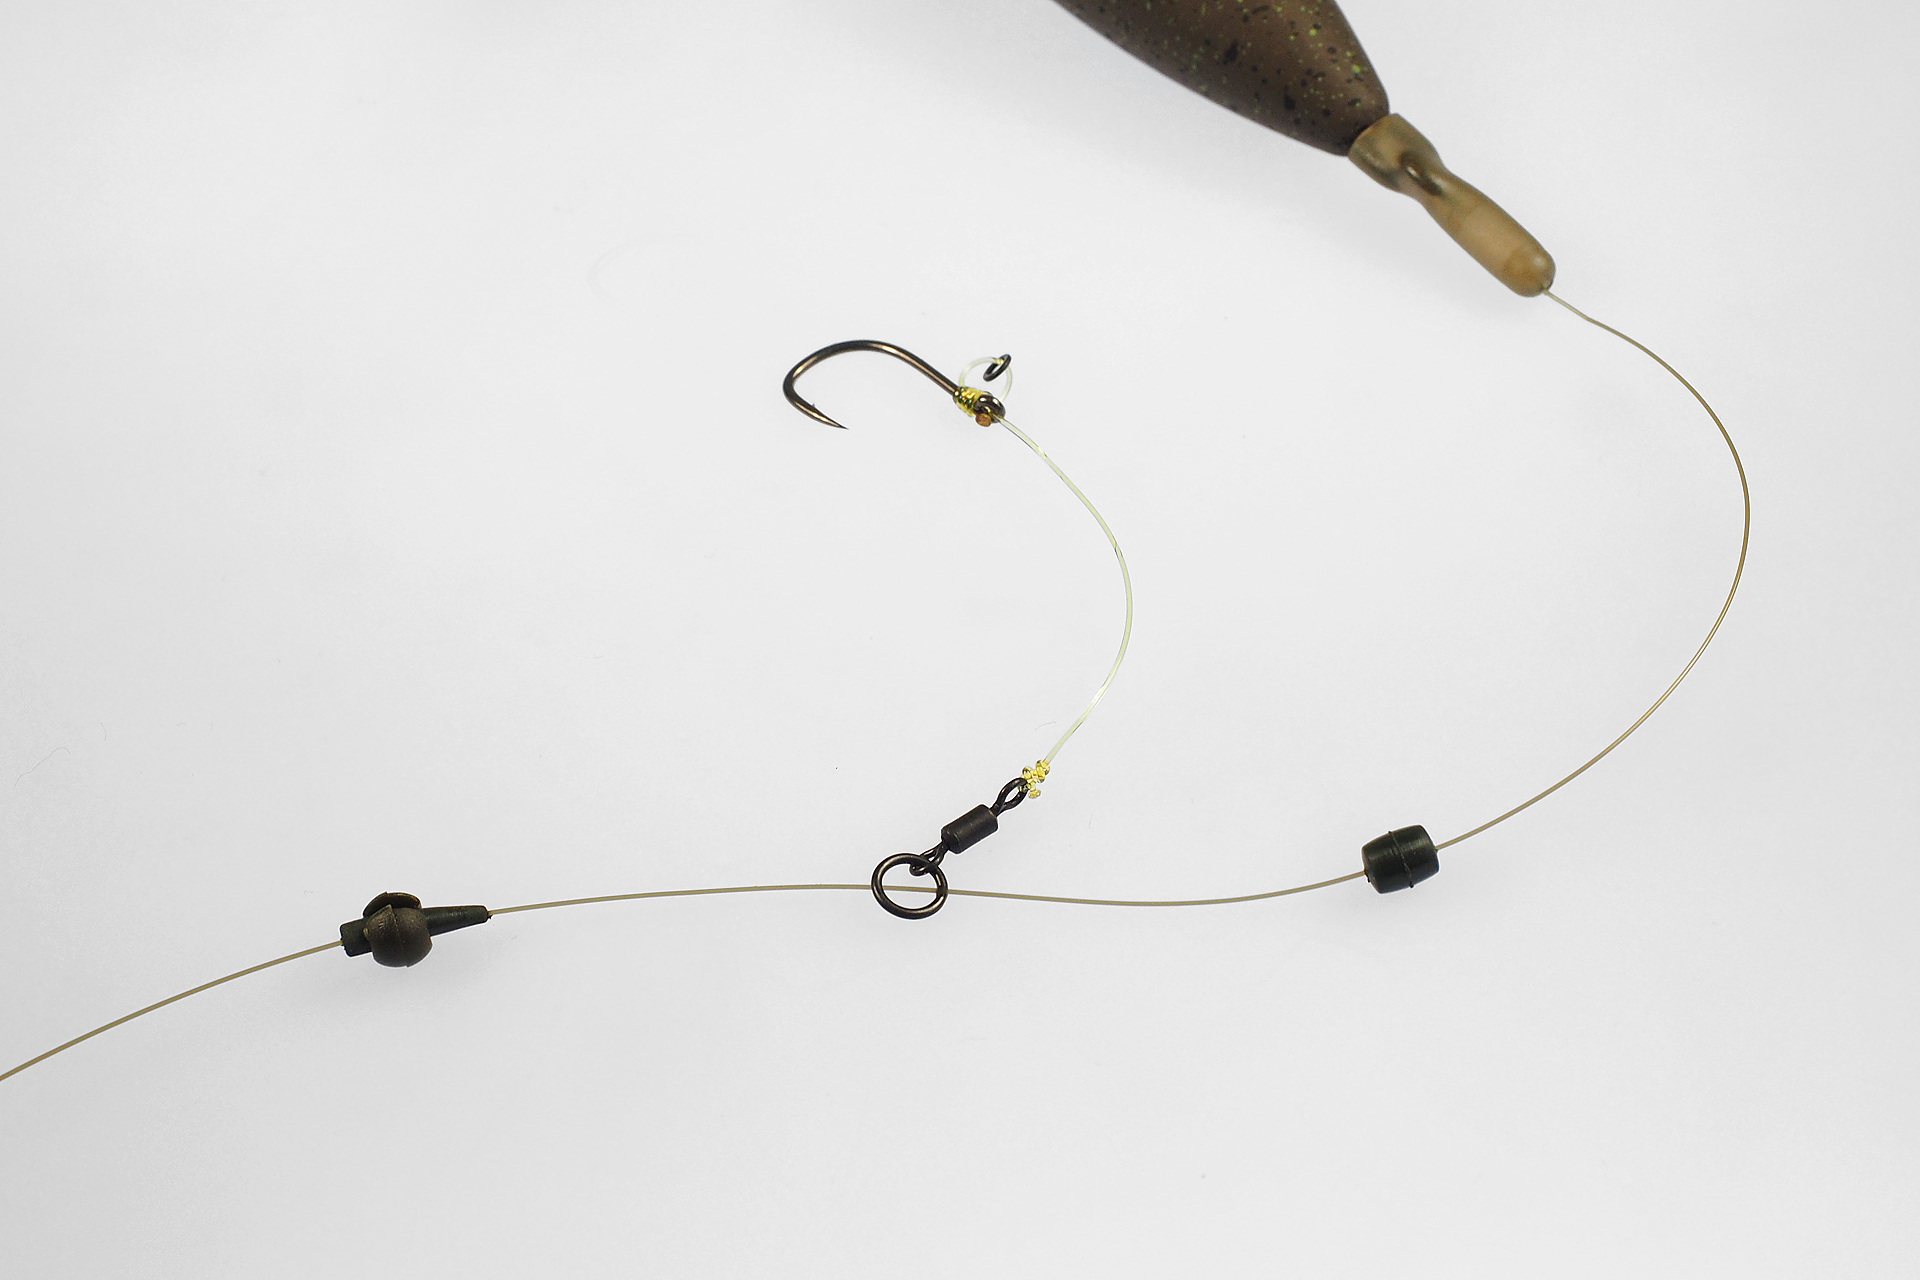 Chod Rig ohne Leadcore